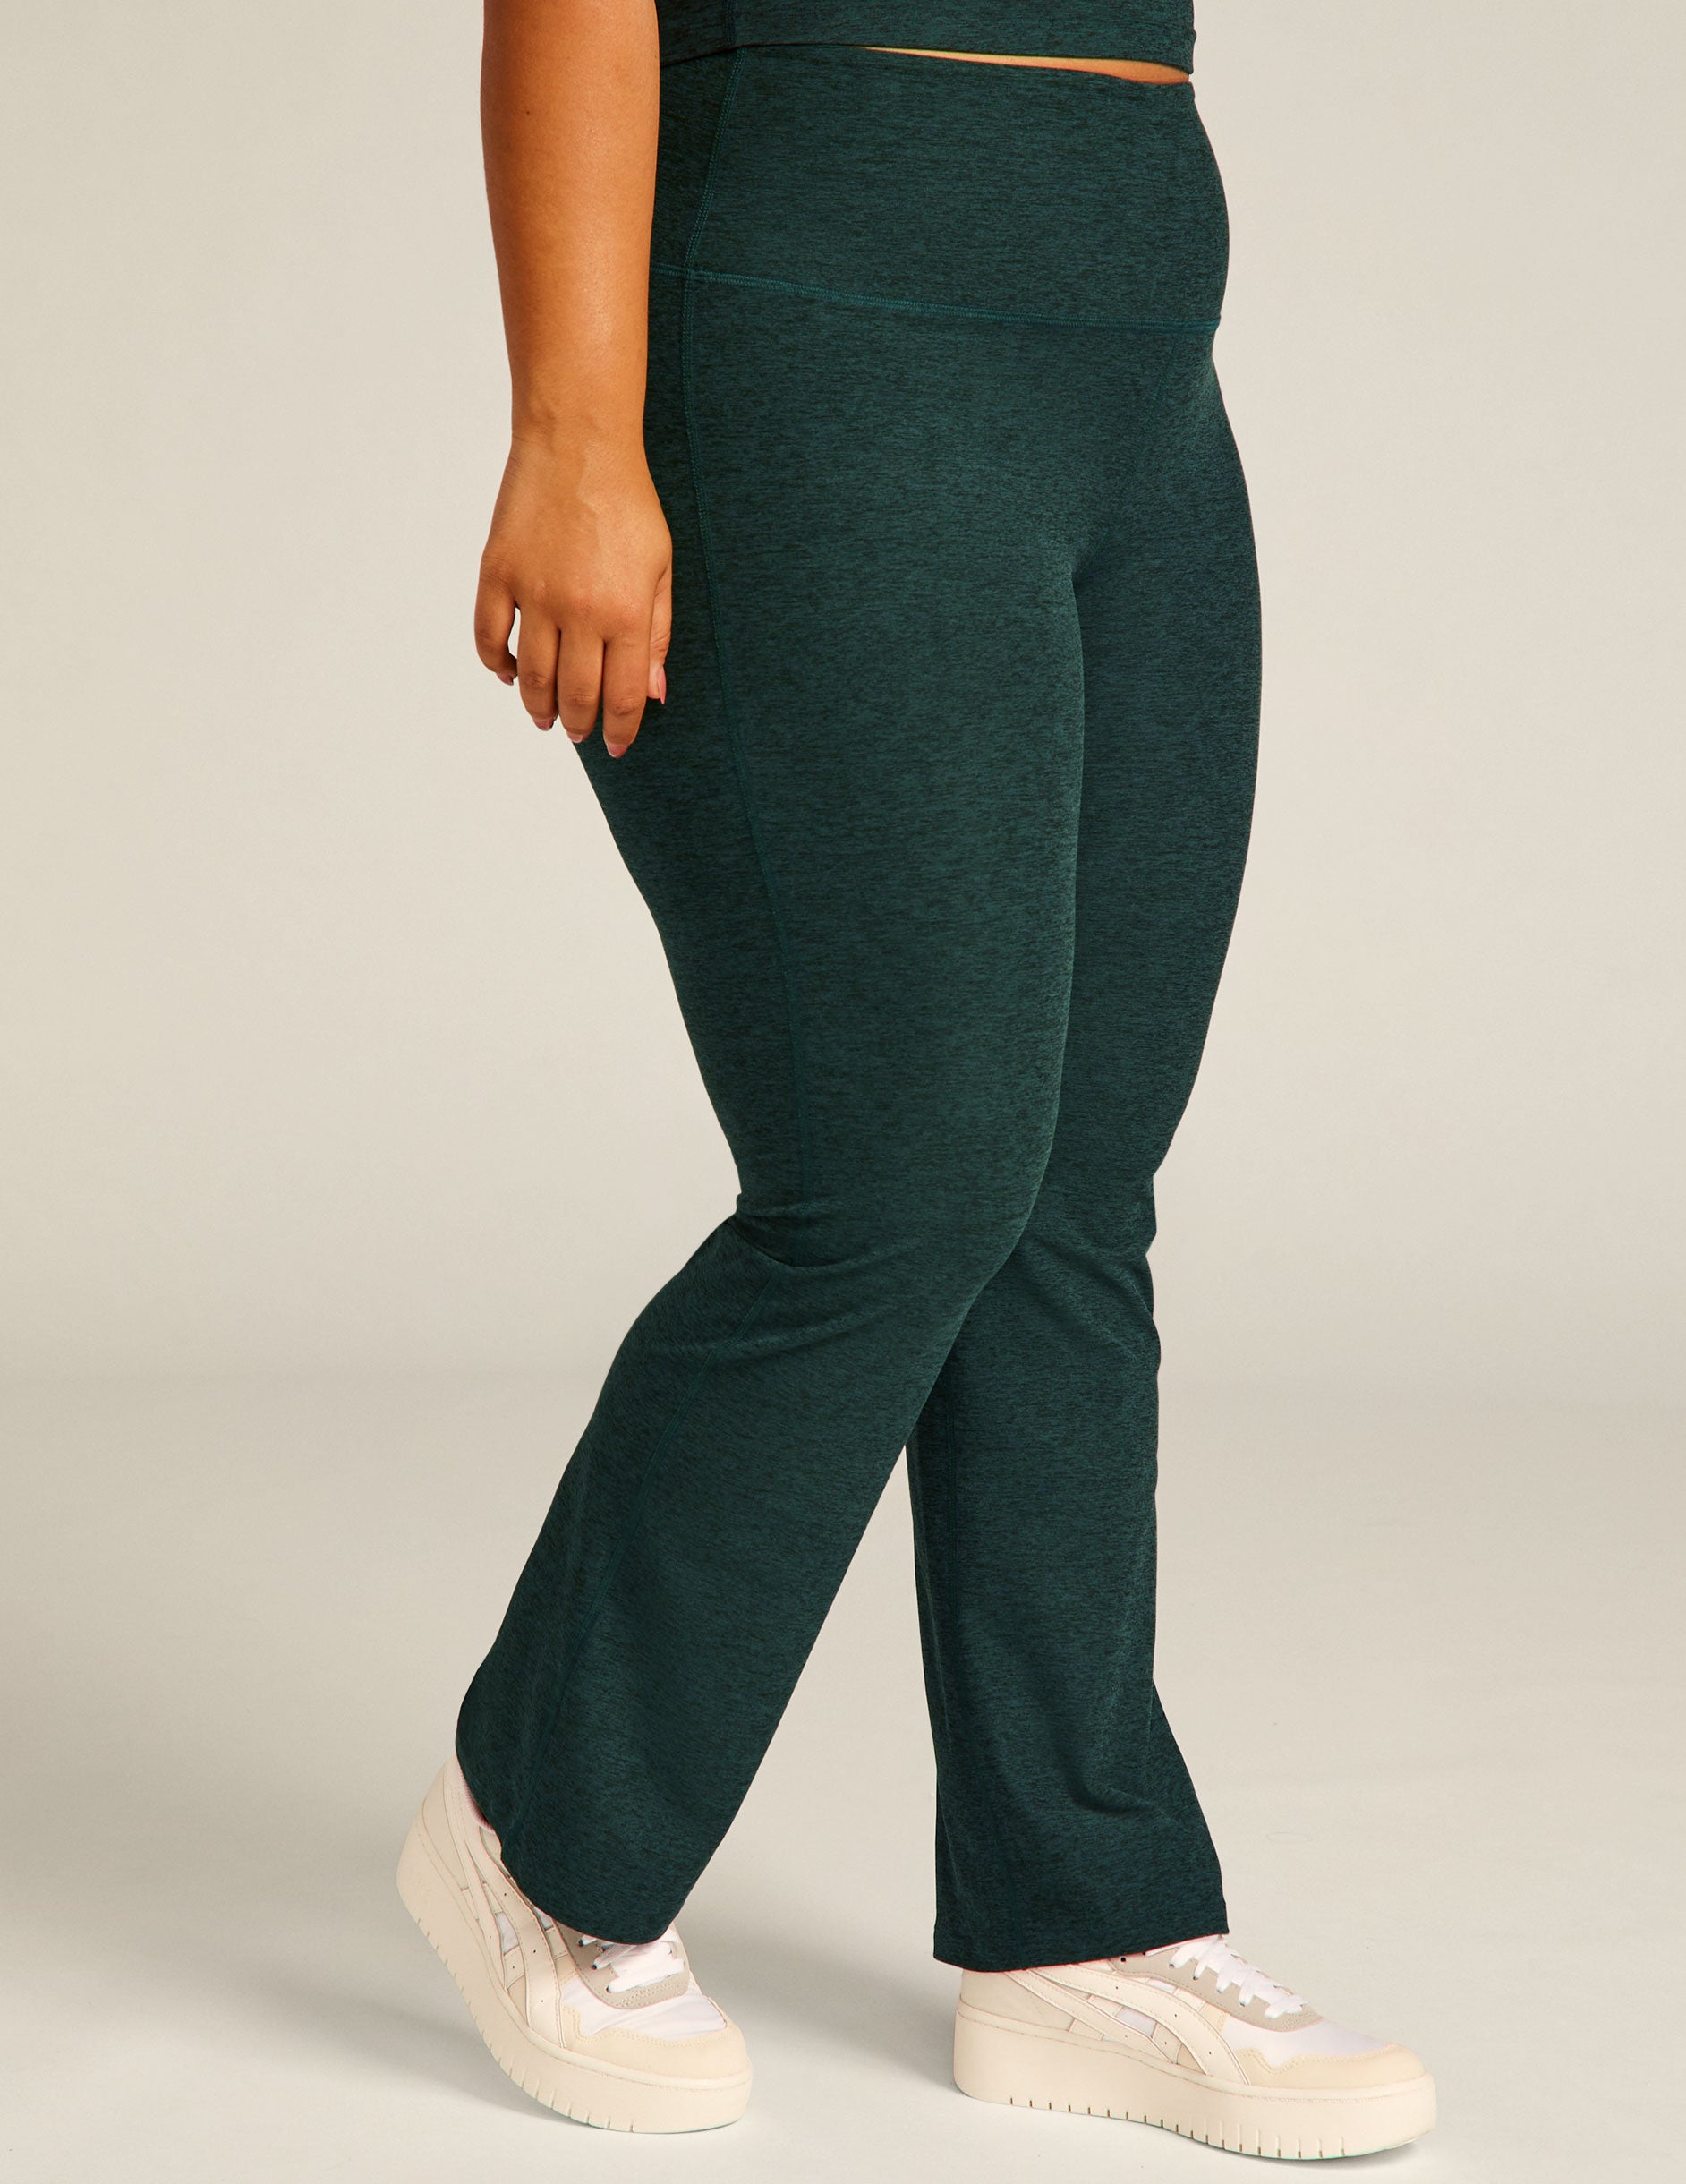 Beyond Yoga Spacedye High-Waisted Practice Pants  Anthropologie Korea -  Women's Clothing, Accessories & Home